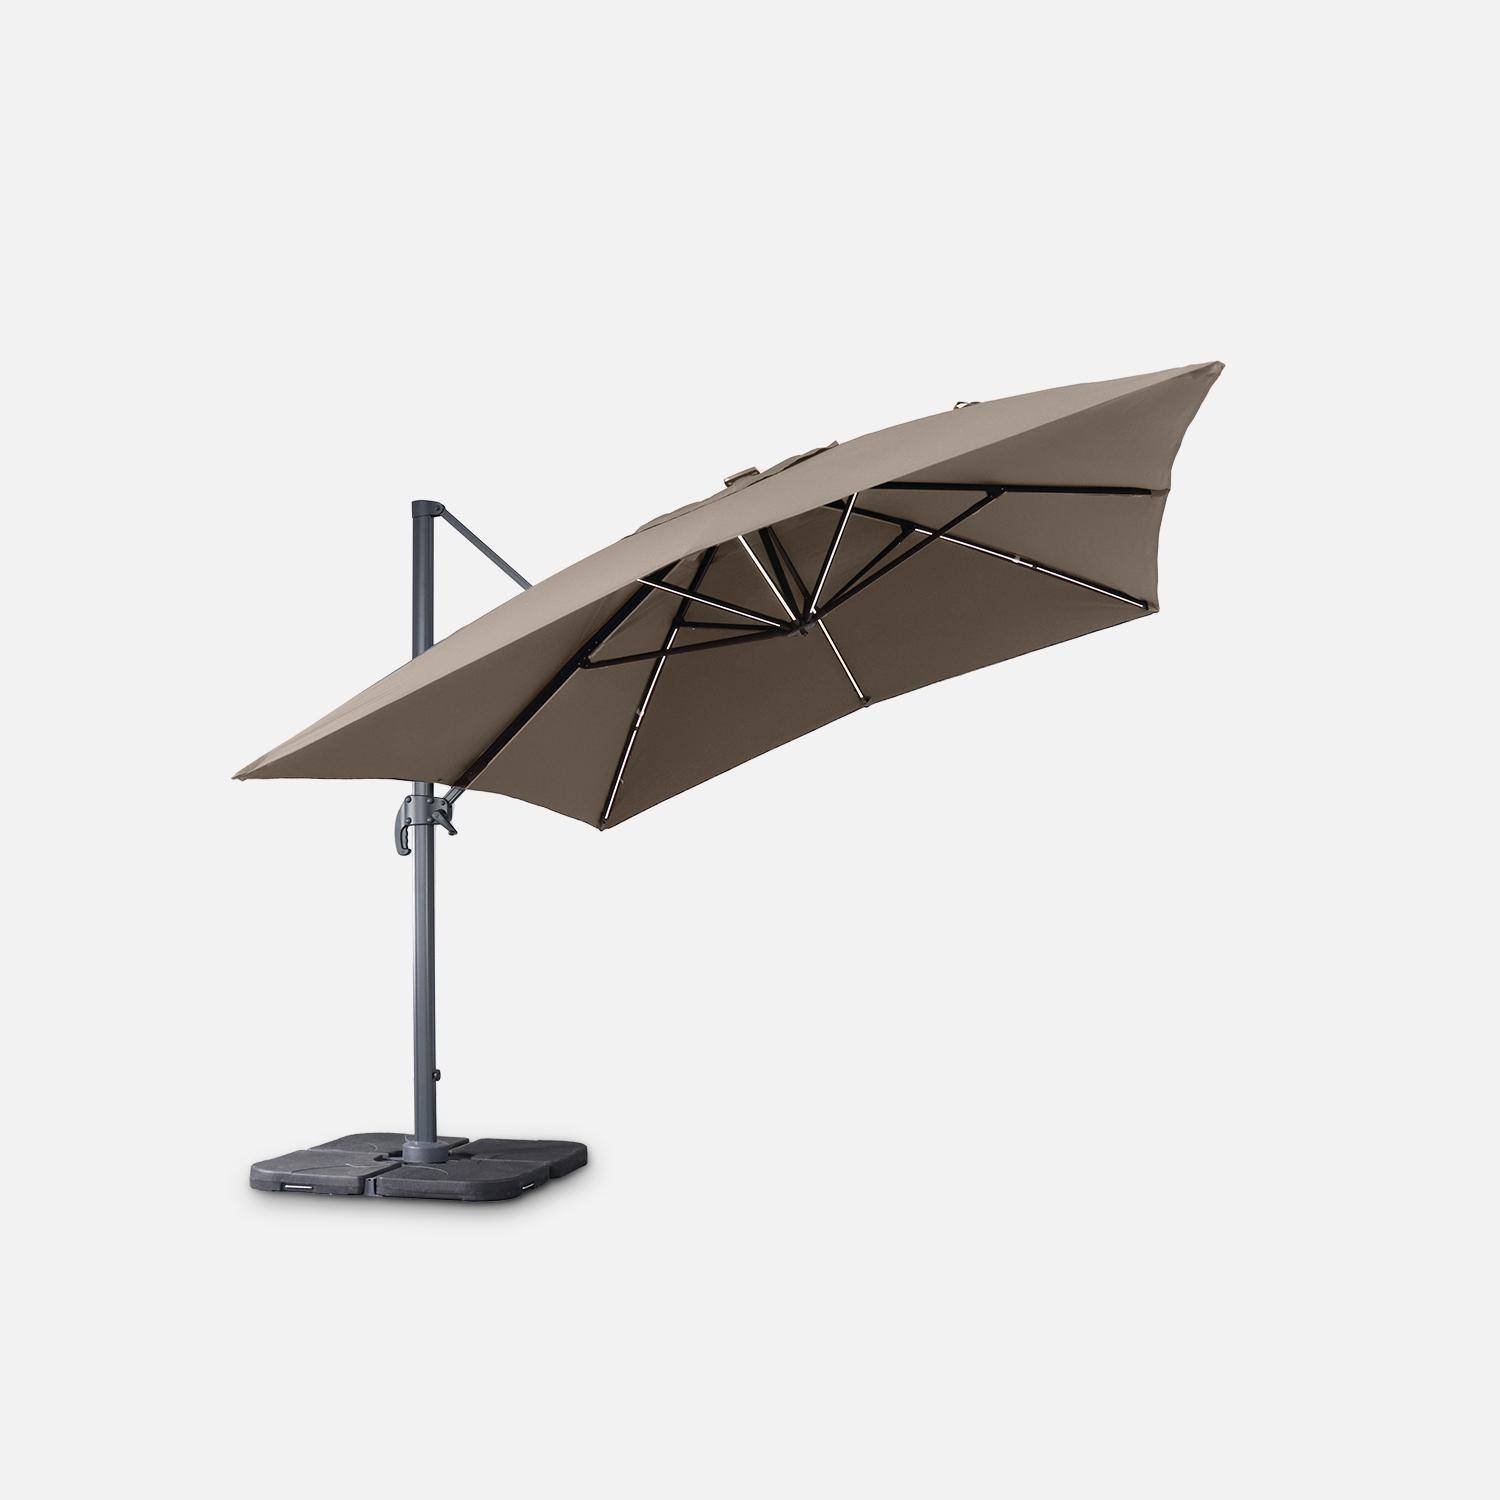 Premium rectangular 3x4m cantilever parasol with solar-powered integrated LED lights - Cantilever parasol, tiltable, foldable with 360° rotation, solar charging, cover included - Luce - Beige-brown,sweeek,Photo3